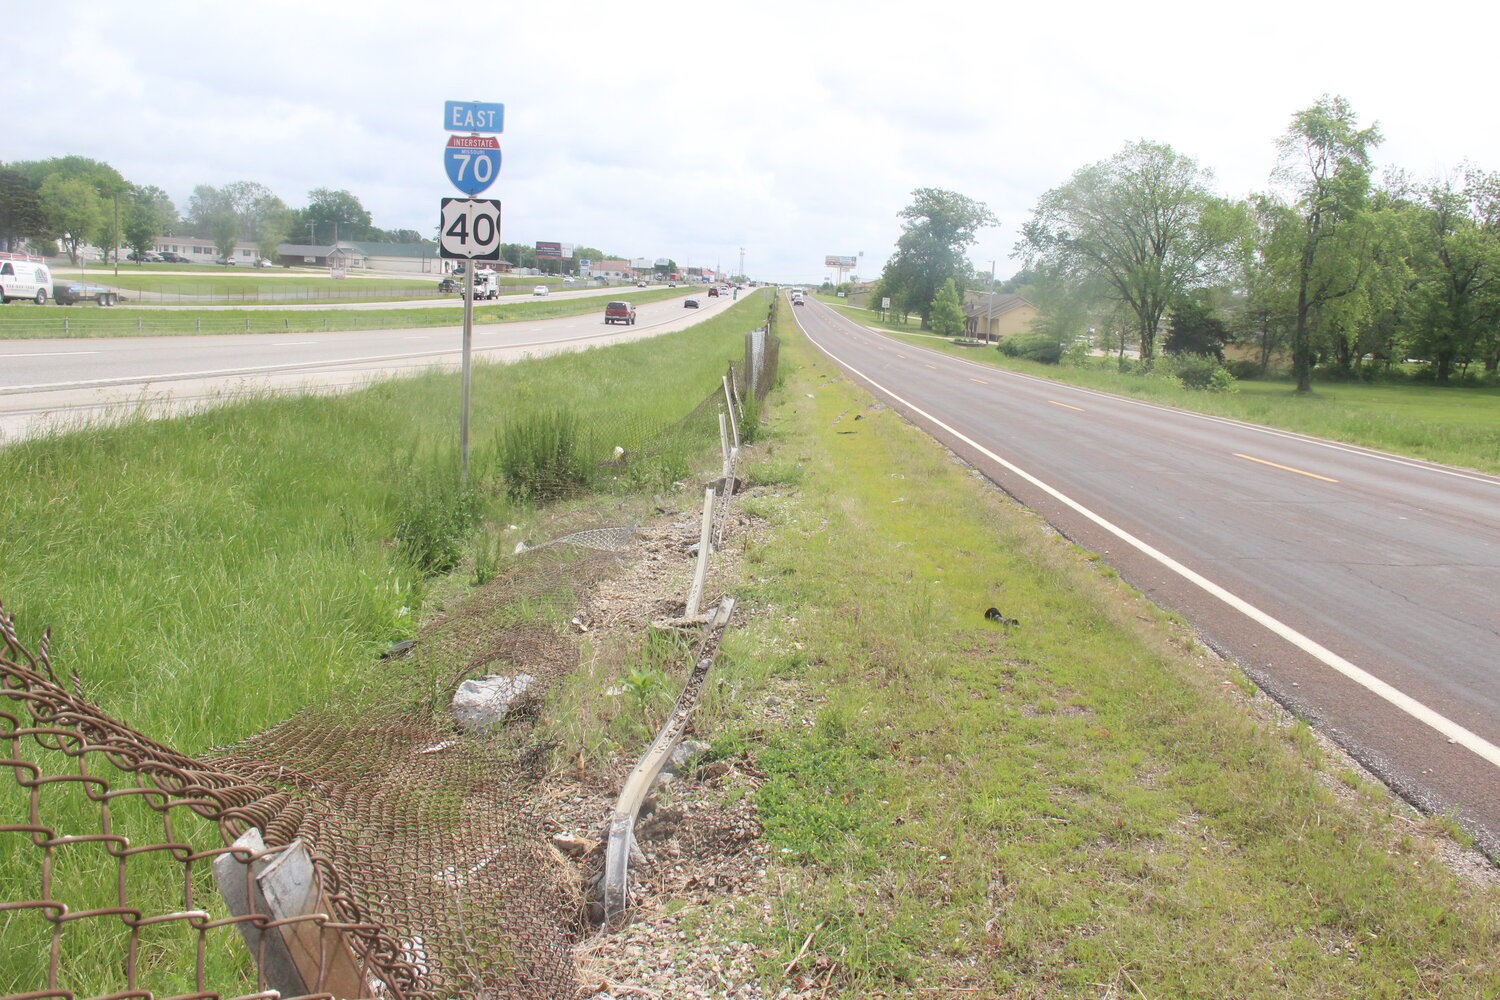 Damage from the May 9 crash was still visible the afternoon of May 12, including a severely damaged fence that separates Interstate 70 from Veterans Memorial Parkway in Wright City.